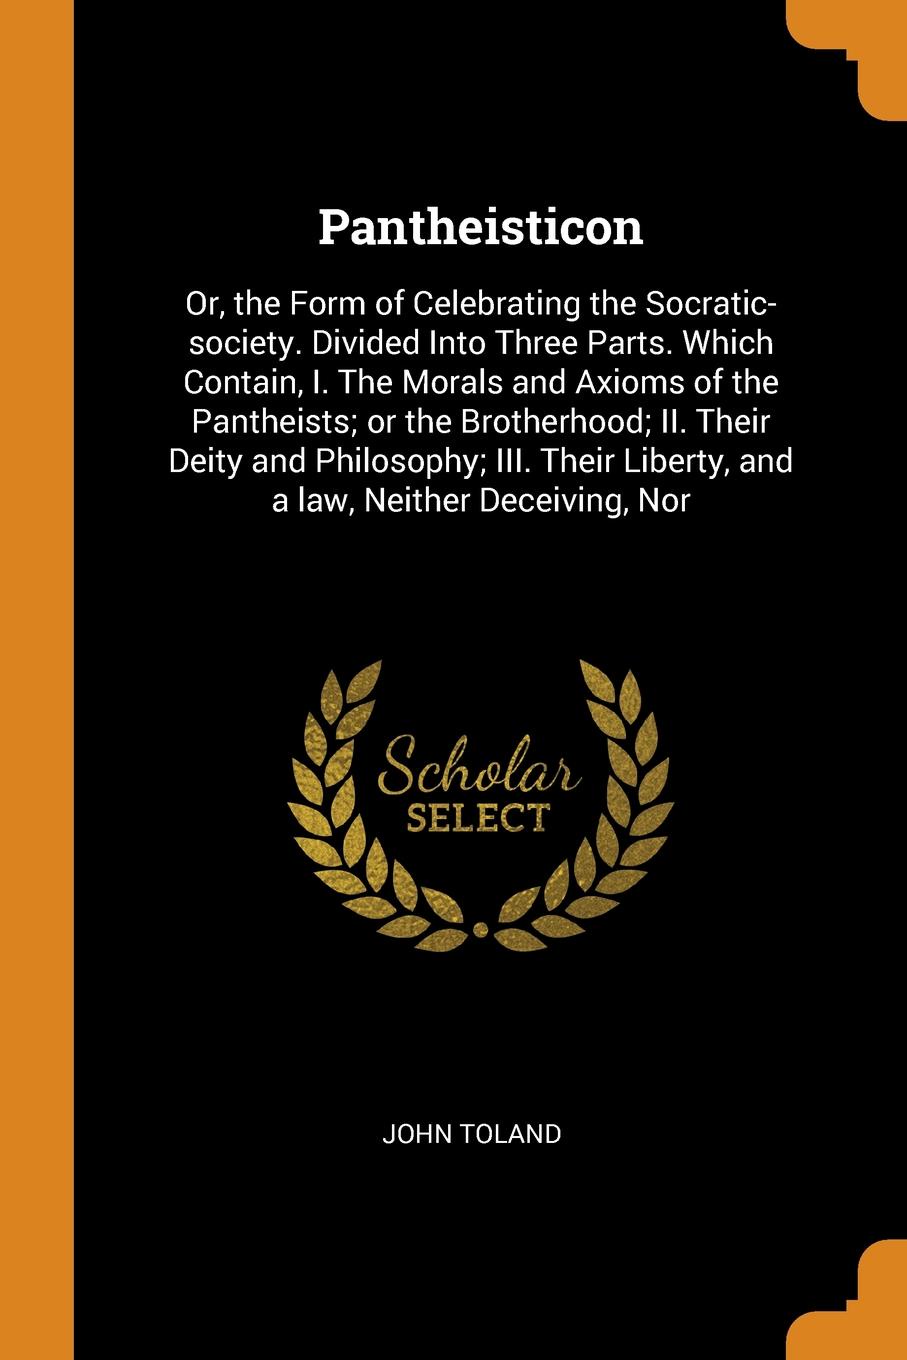 Pantheisticon. Or, the Form of Celebrating the Socratic-society. Divided Into Three Parts. Which Contain, I. The Morals and Axioms of the Pantheists; or the Brotherhood; II. Their Deity and Philosophy; III. Their Liberty, and a law, Neither Deceiv...